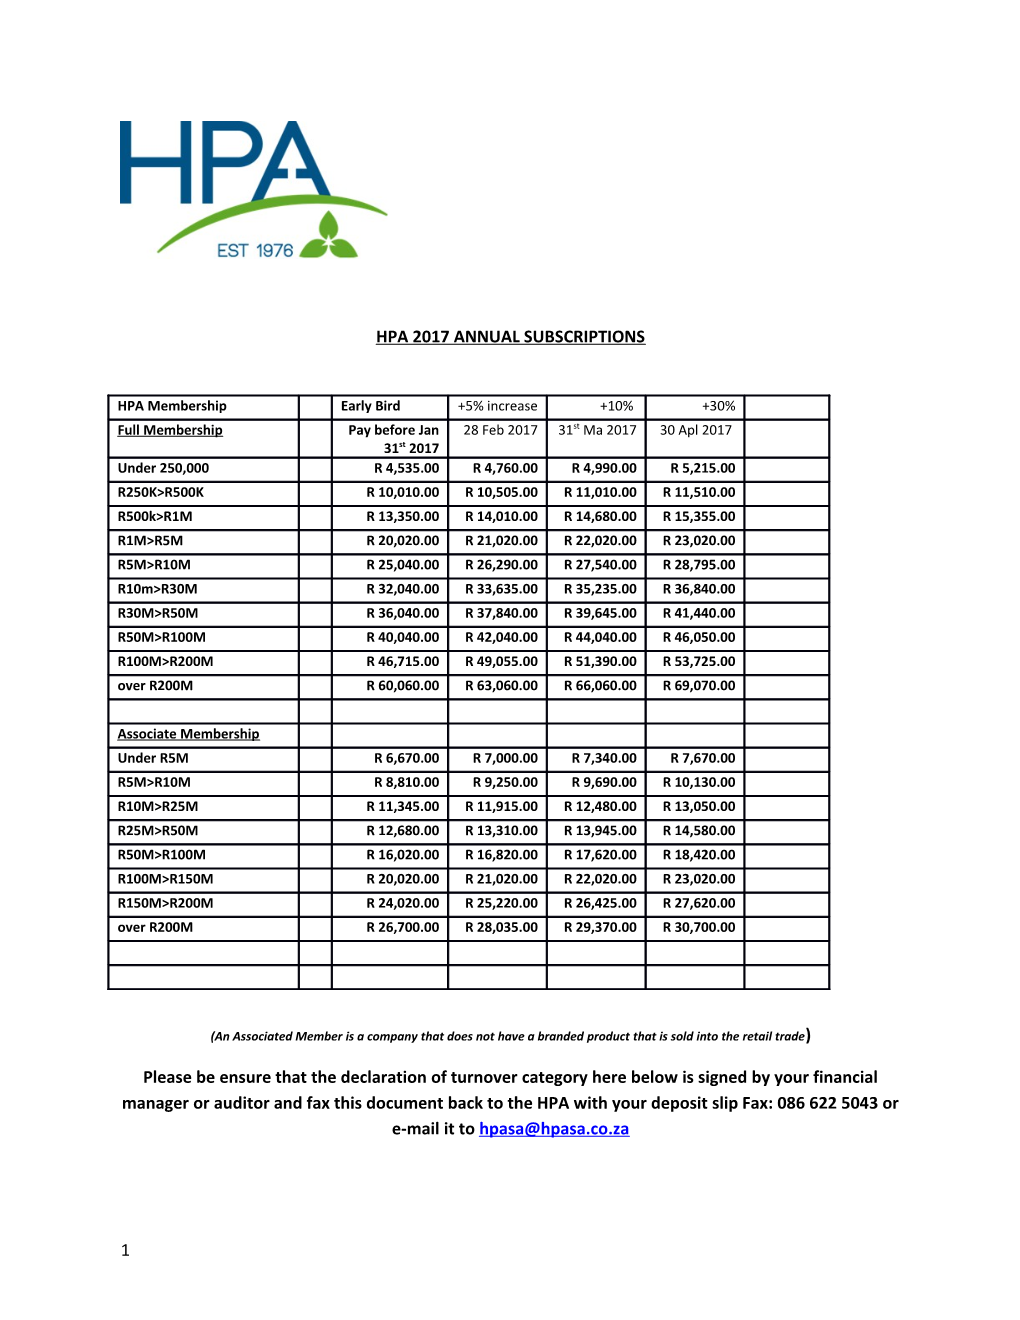 Hpa 2017 Annual Subscriptions